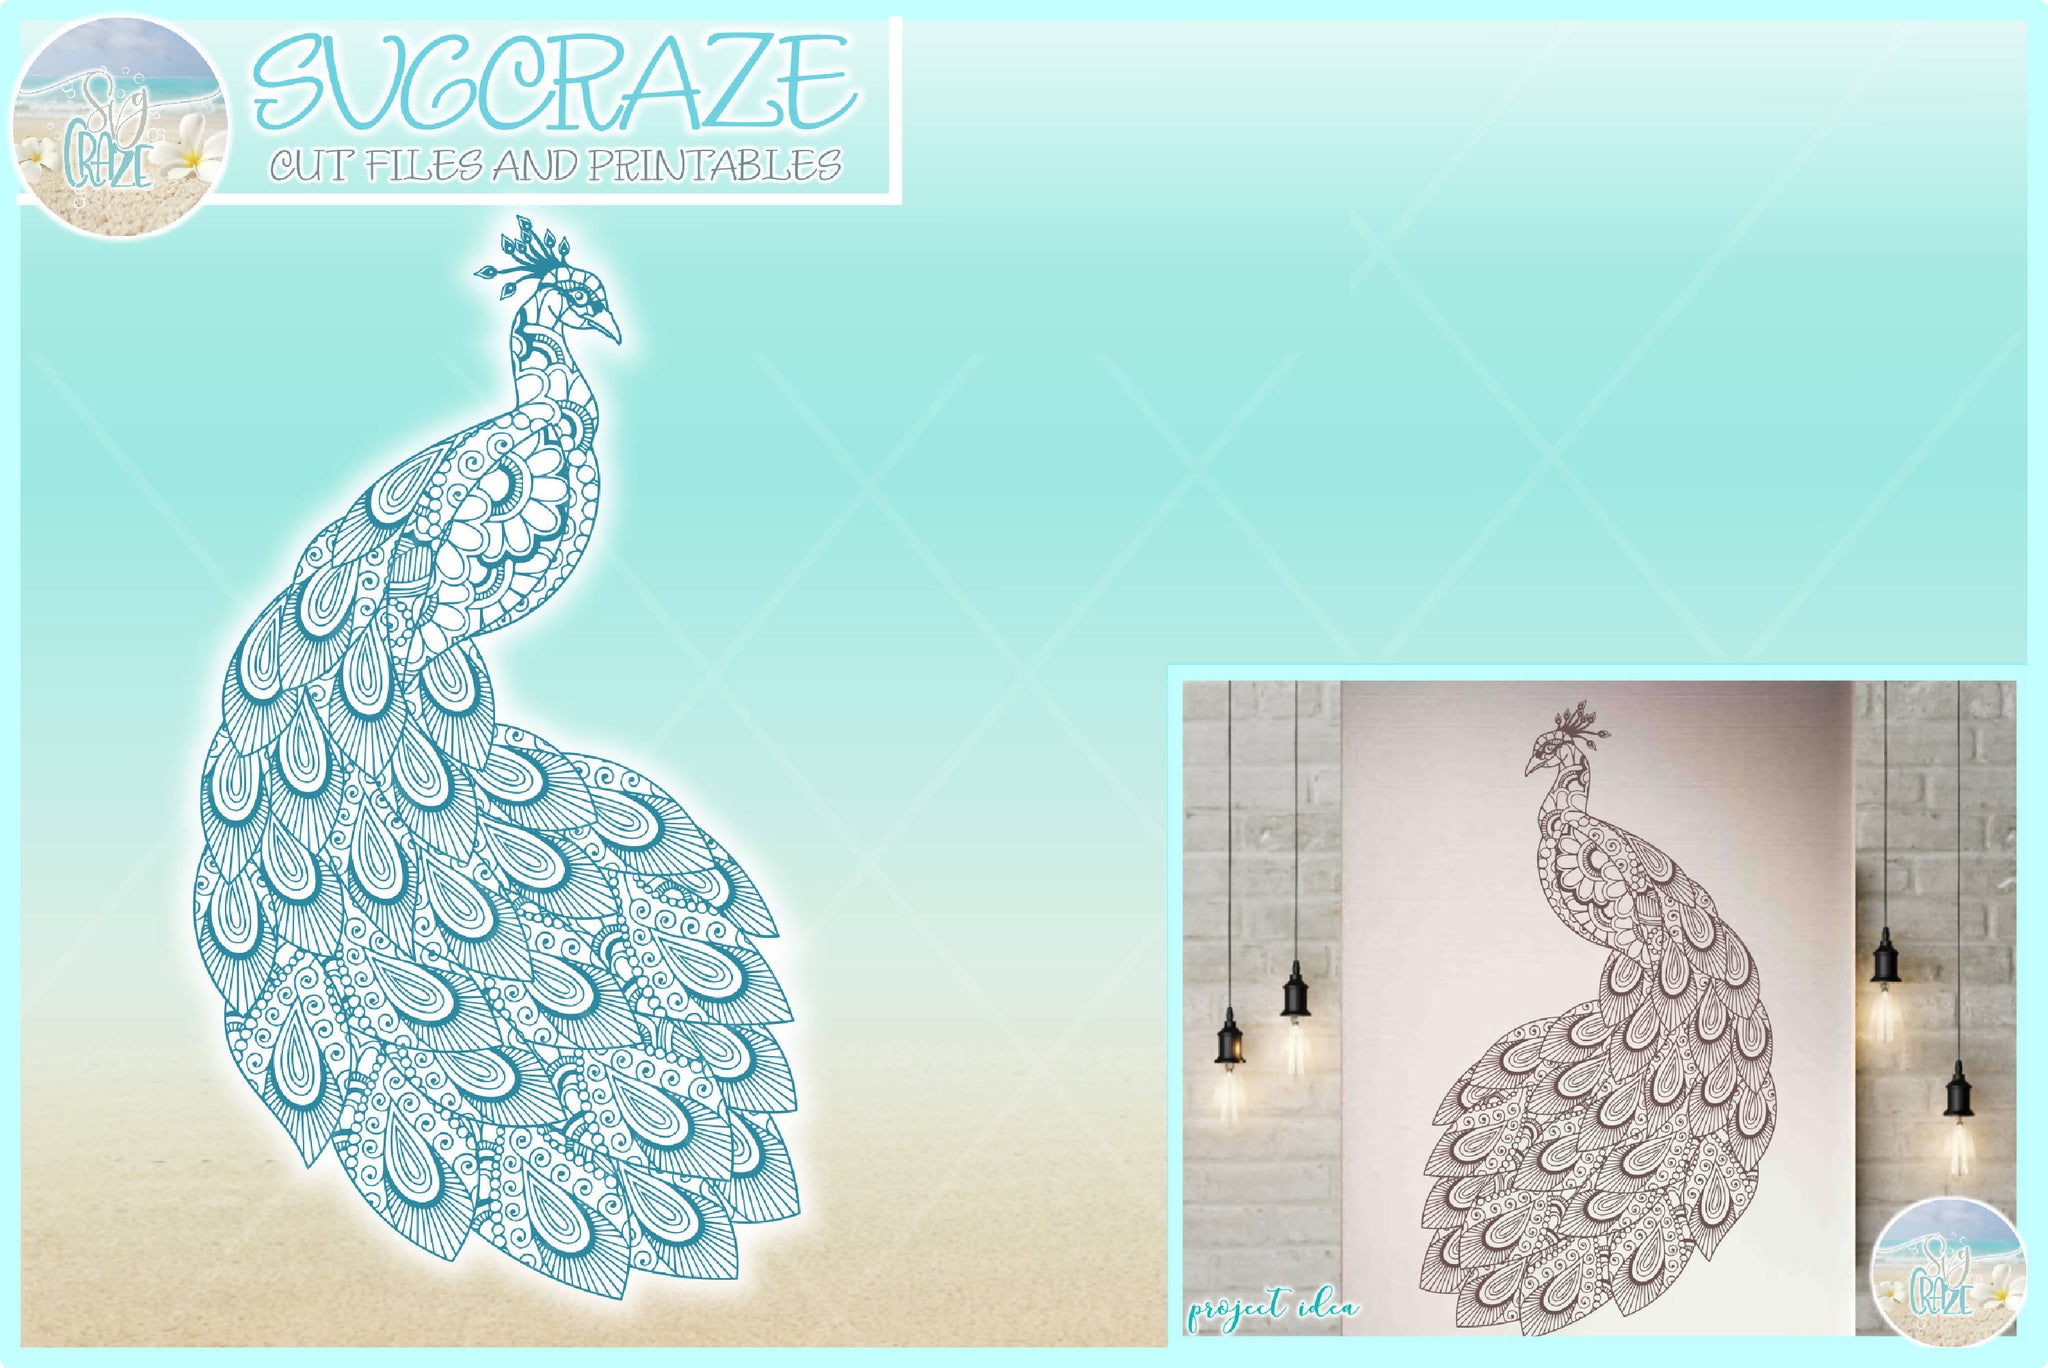 Download Zentangle Peacock Svg Mandala Peacock Svg Zentangle Animal Svg Cricut Svg File Zentagle For Cricut Silhouette Cut Files Intricate Svg Clip Art Art Collectibles Theconnectfirm Org